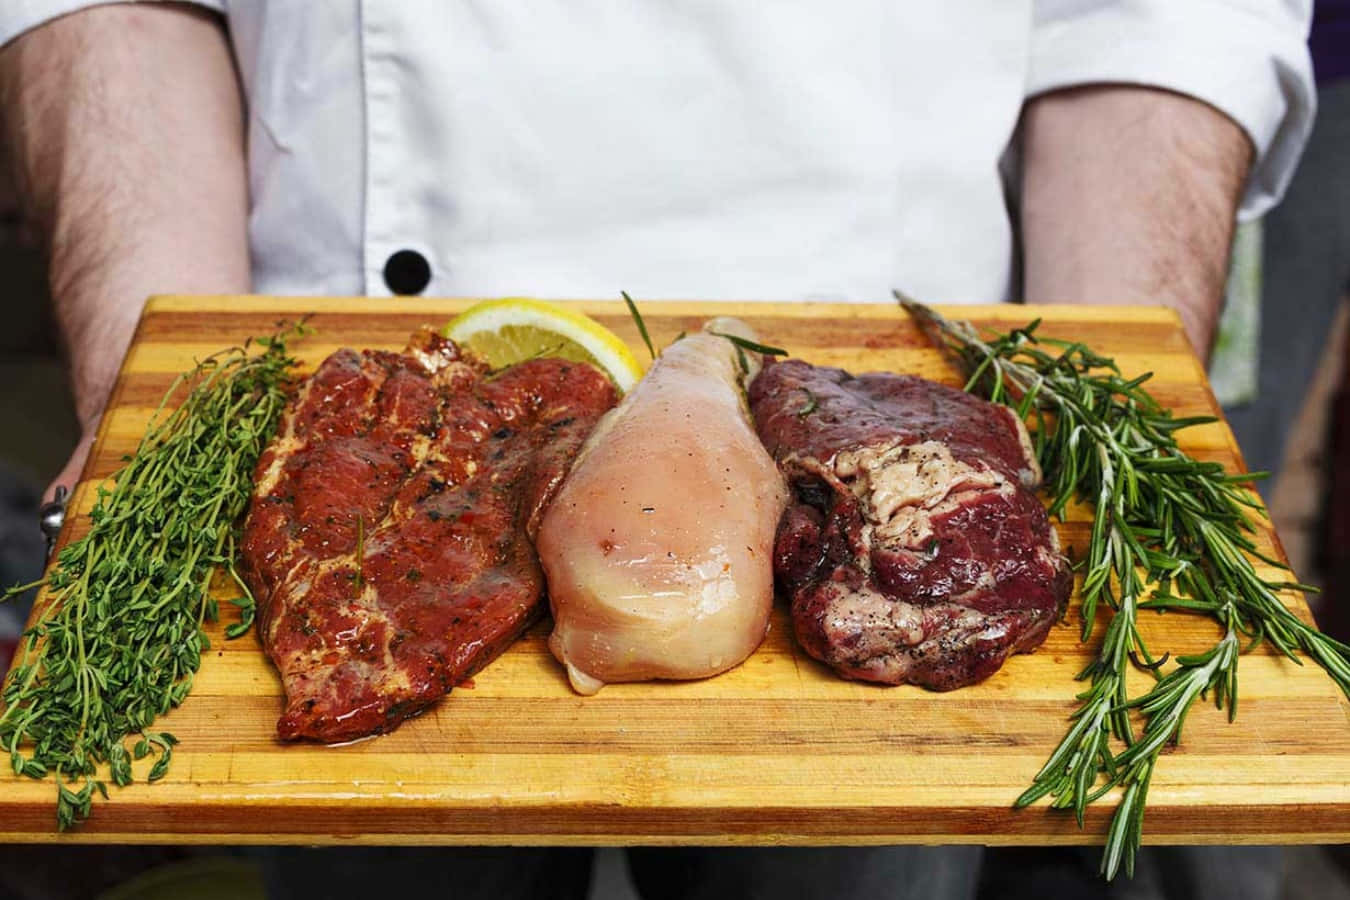 A Fresh Selection Of Juicy And Tender Meat